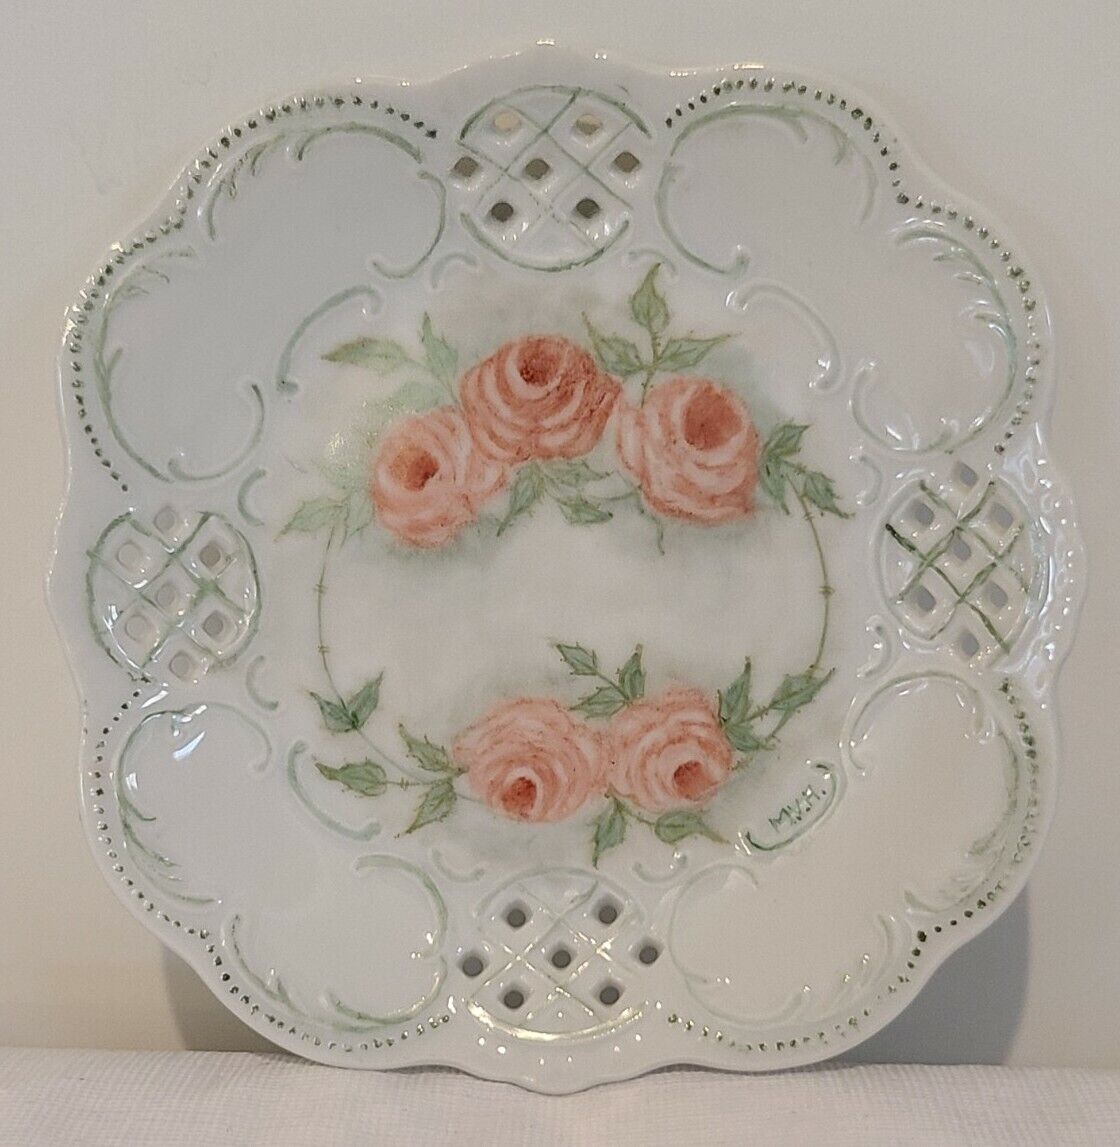 Vintage Hand Painted Plate With Roses Signed M.V.H.